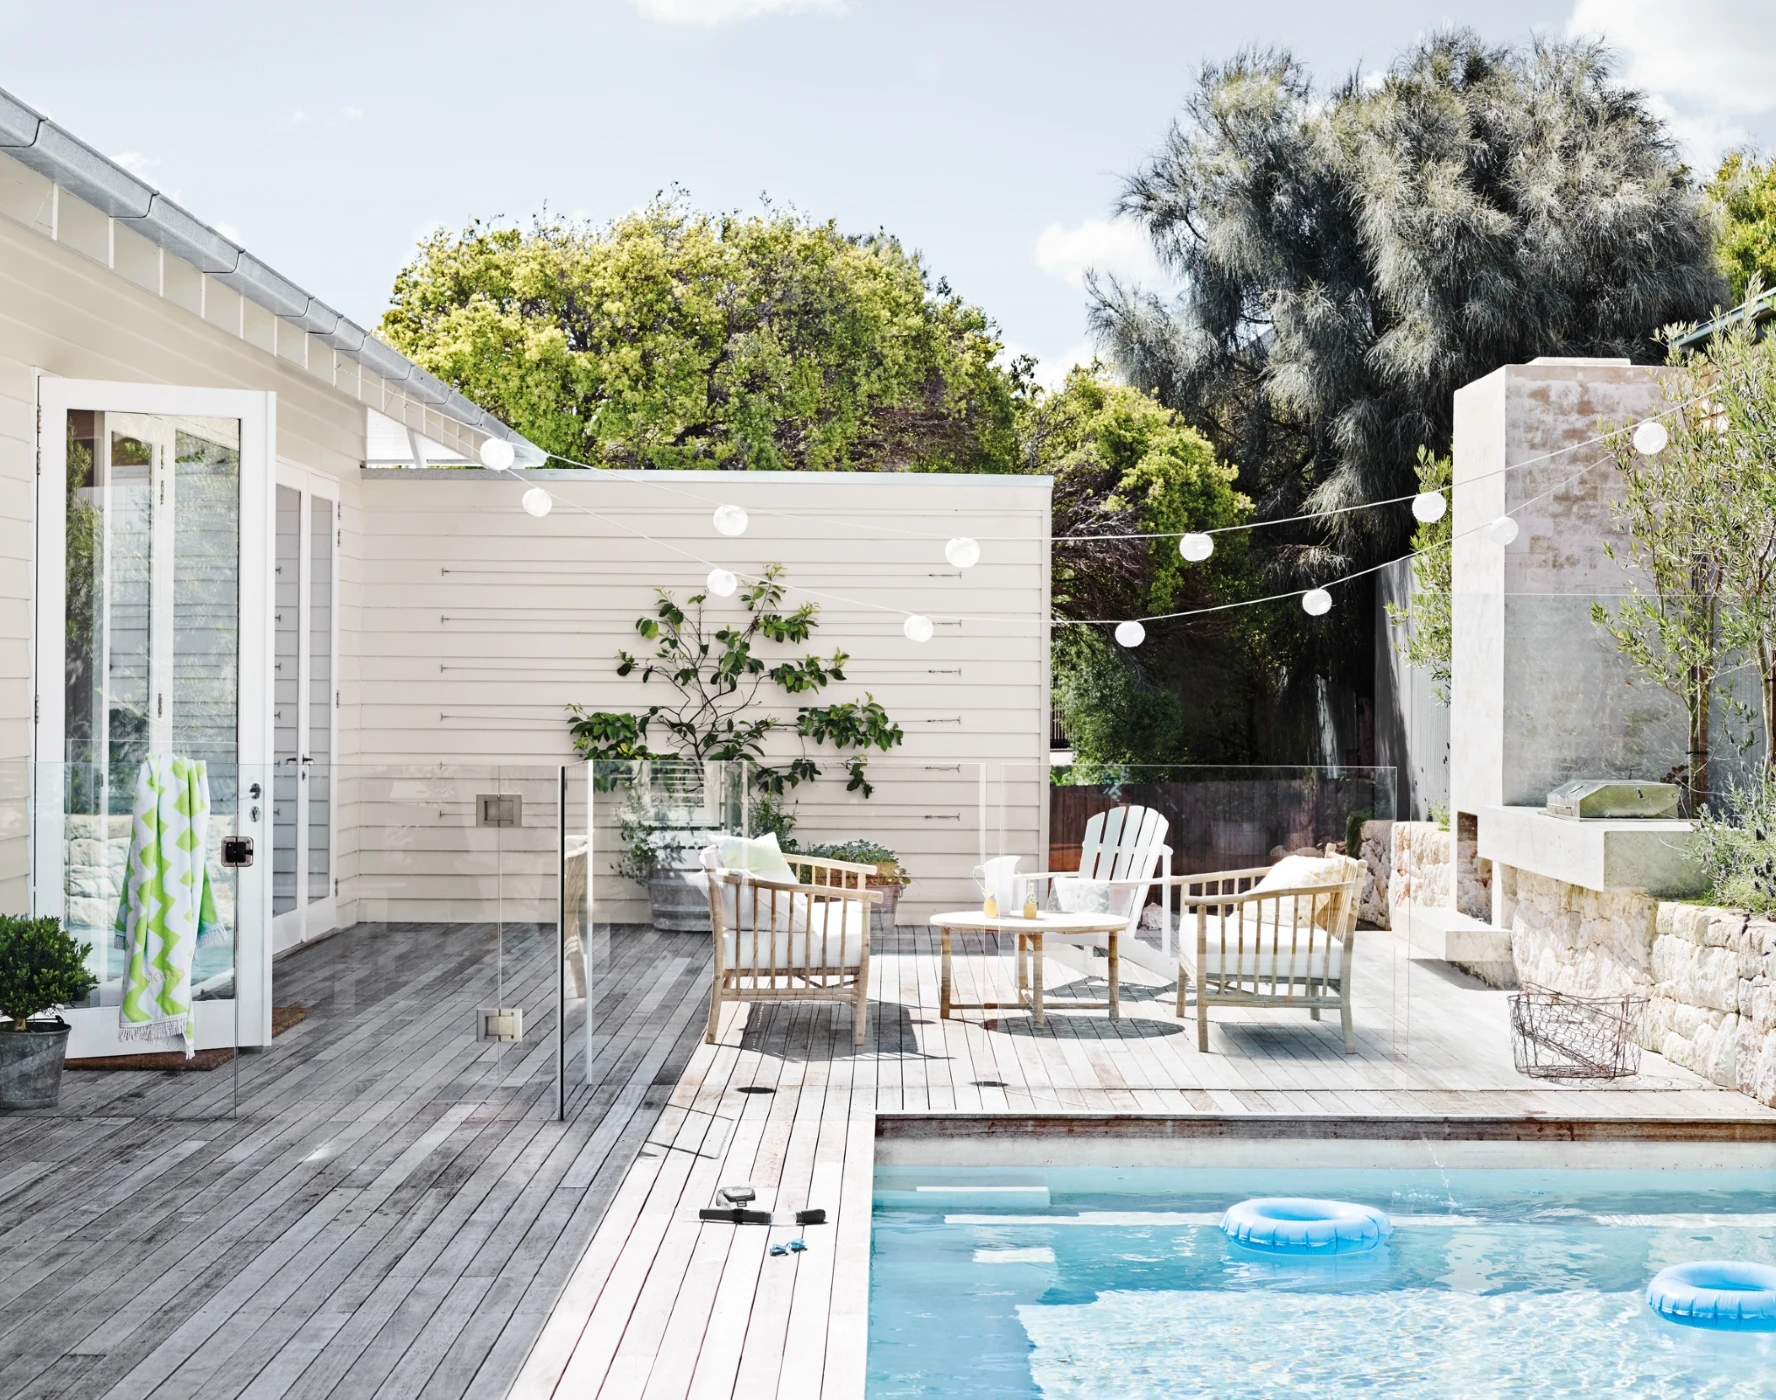 Outdoor pool and deck with white painted walls and seating area